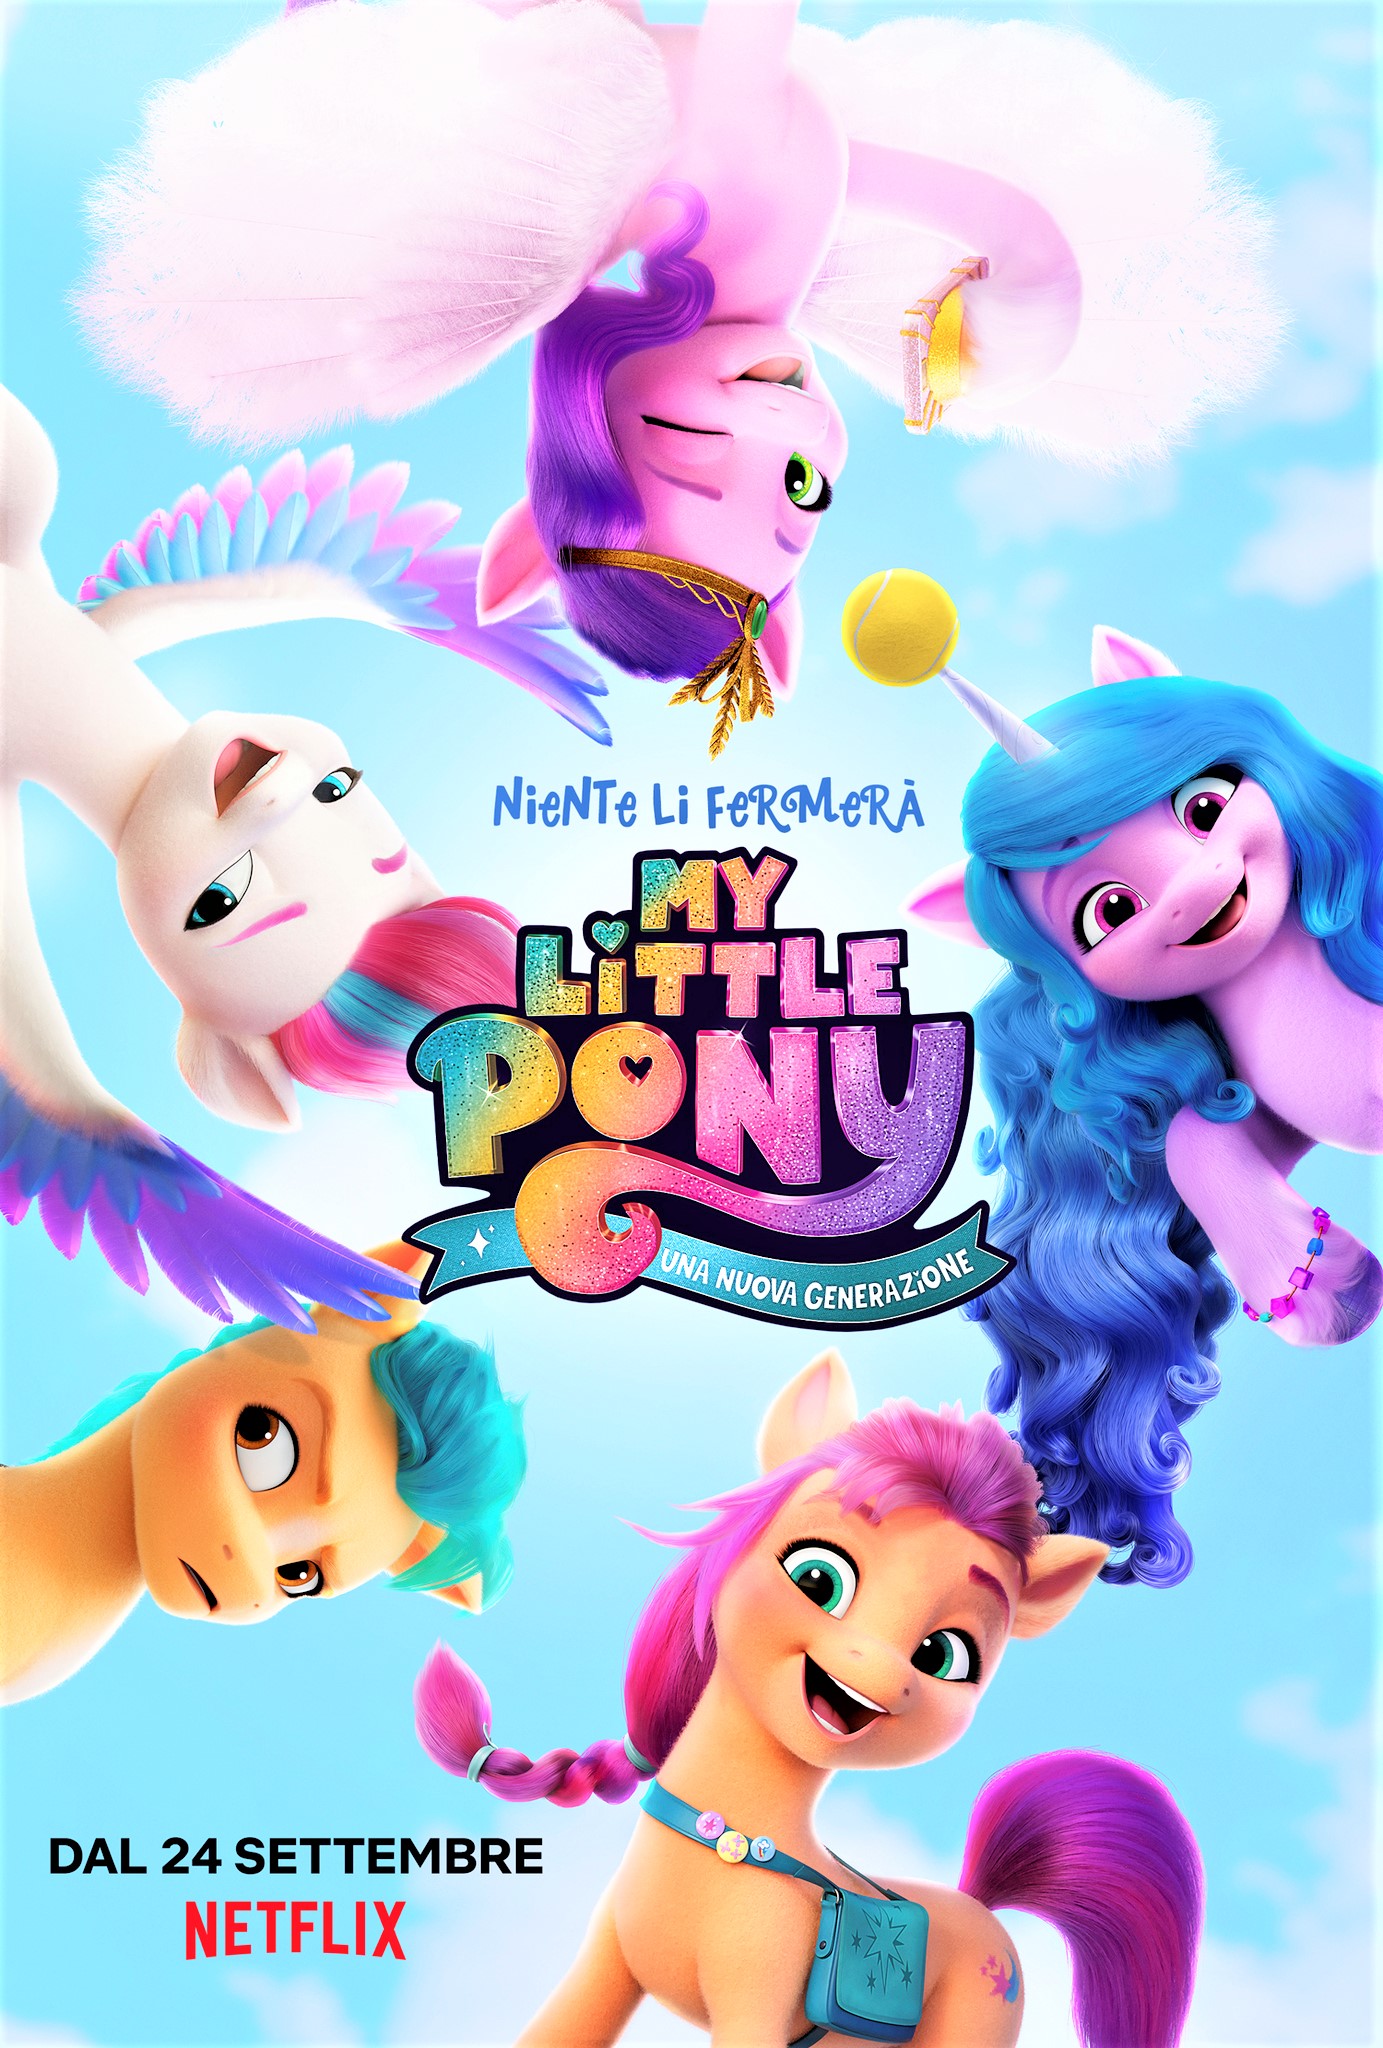 My little Pony: a new generation